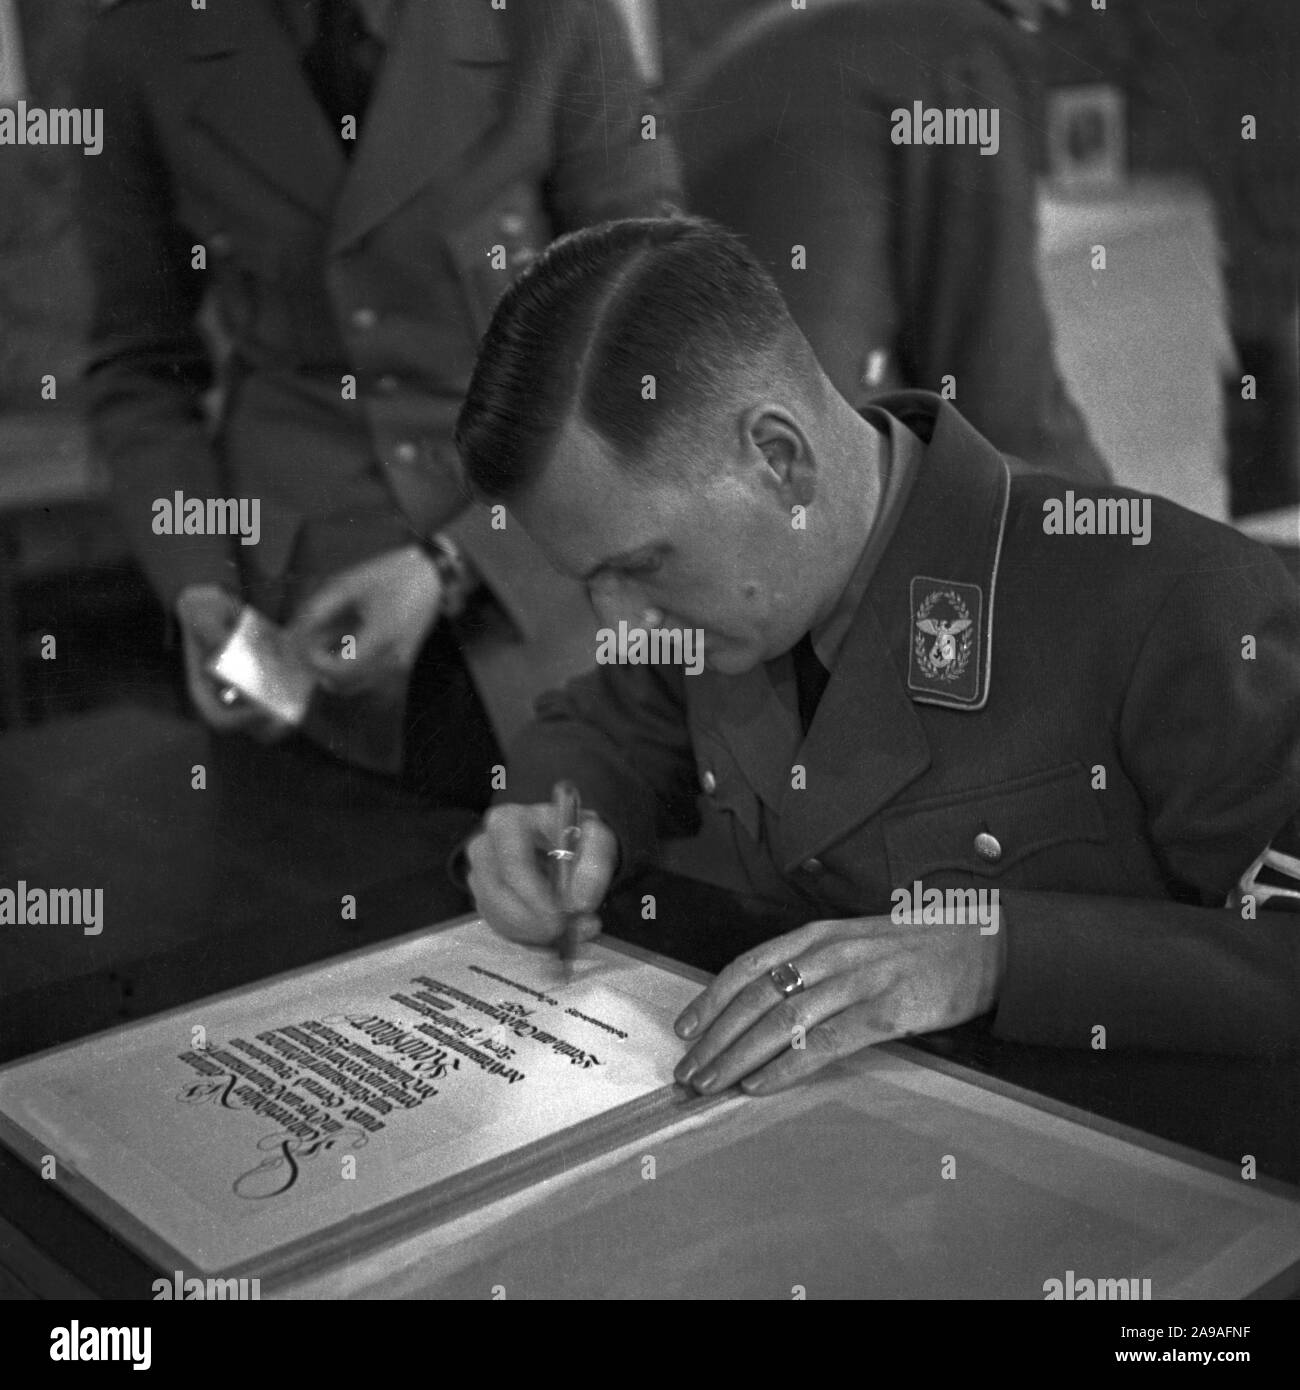 Reichsleiter signing a document, Germany 1930s. Stock Photo